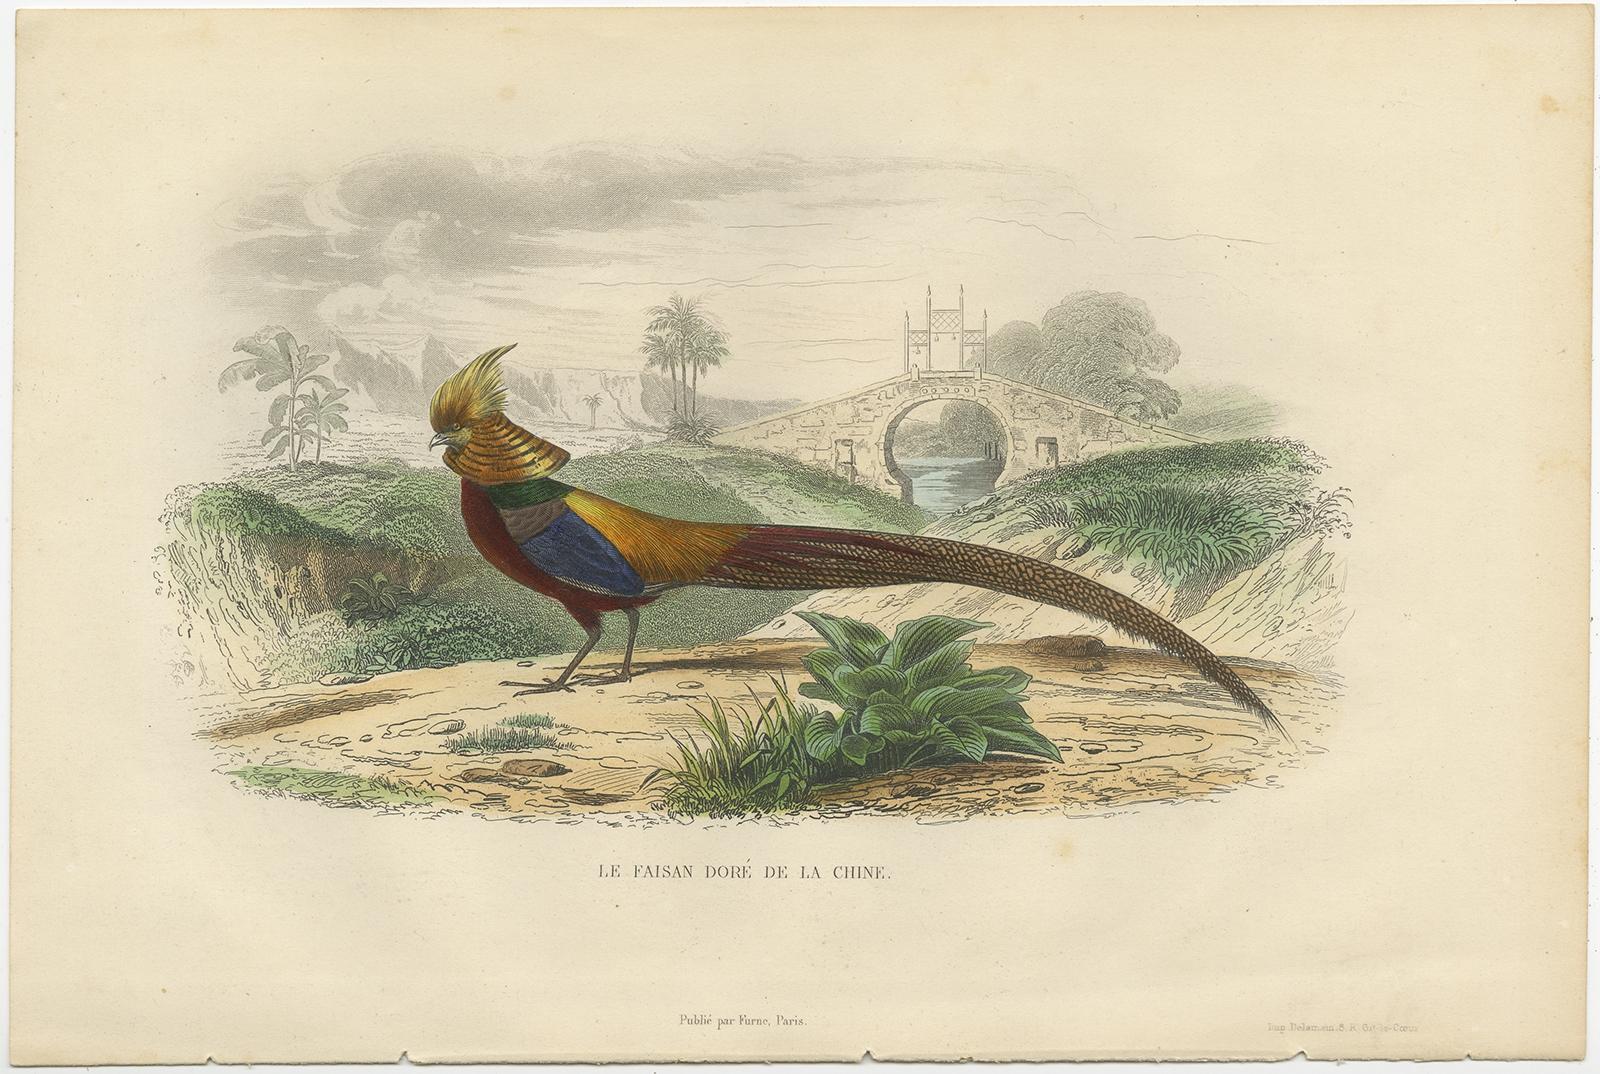 Antique print titled 'Le Faisan doré de la Chine'. Old print of the golden pheasant. Source unknown, to be determined. 

Artists and Engravers: Made by or after Georges-Louis Le Clerc, Comte de Buffon. Published by Delamain.

Condition: Very